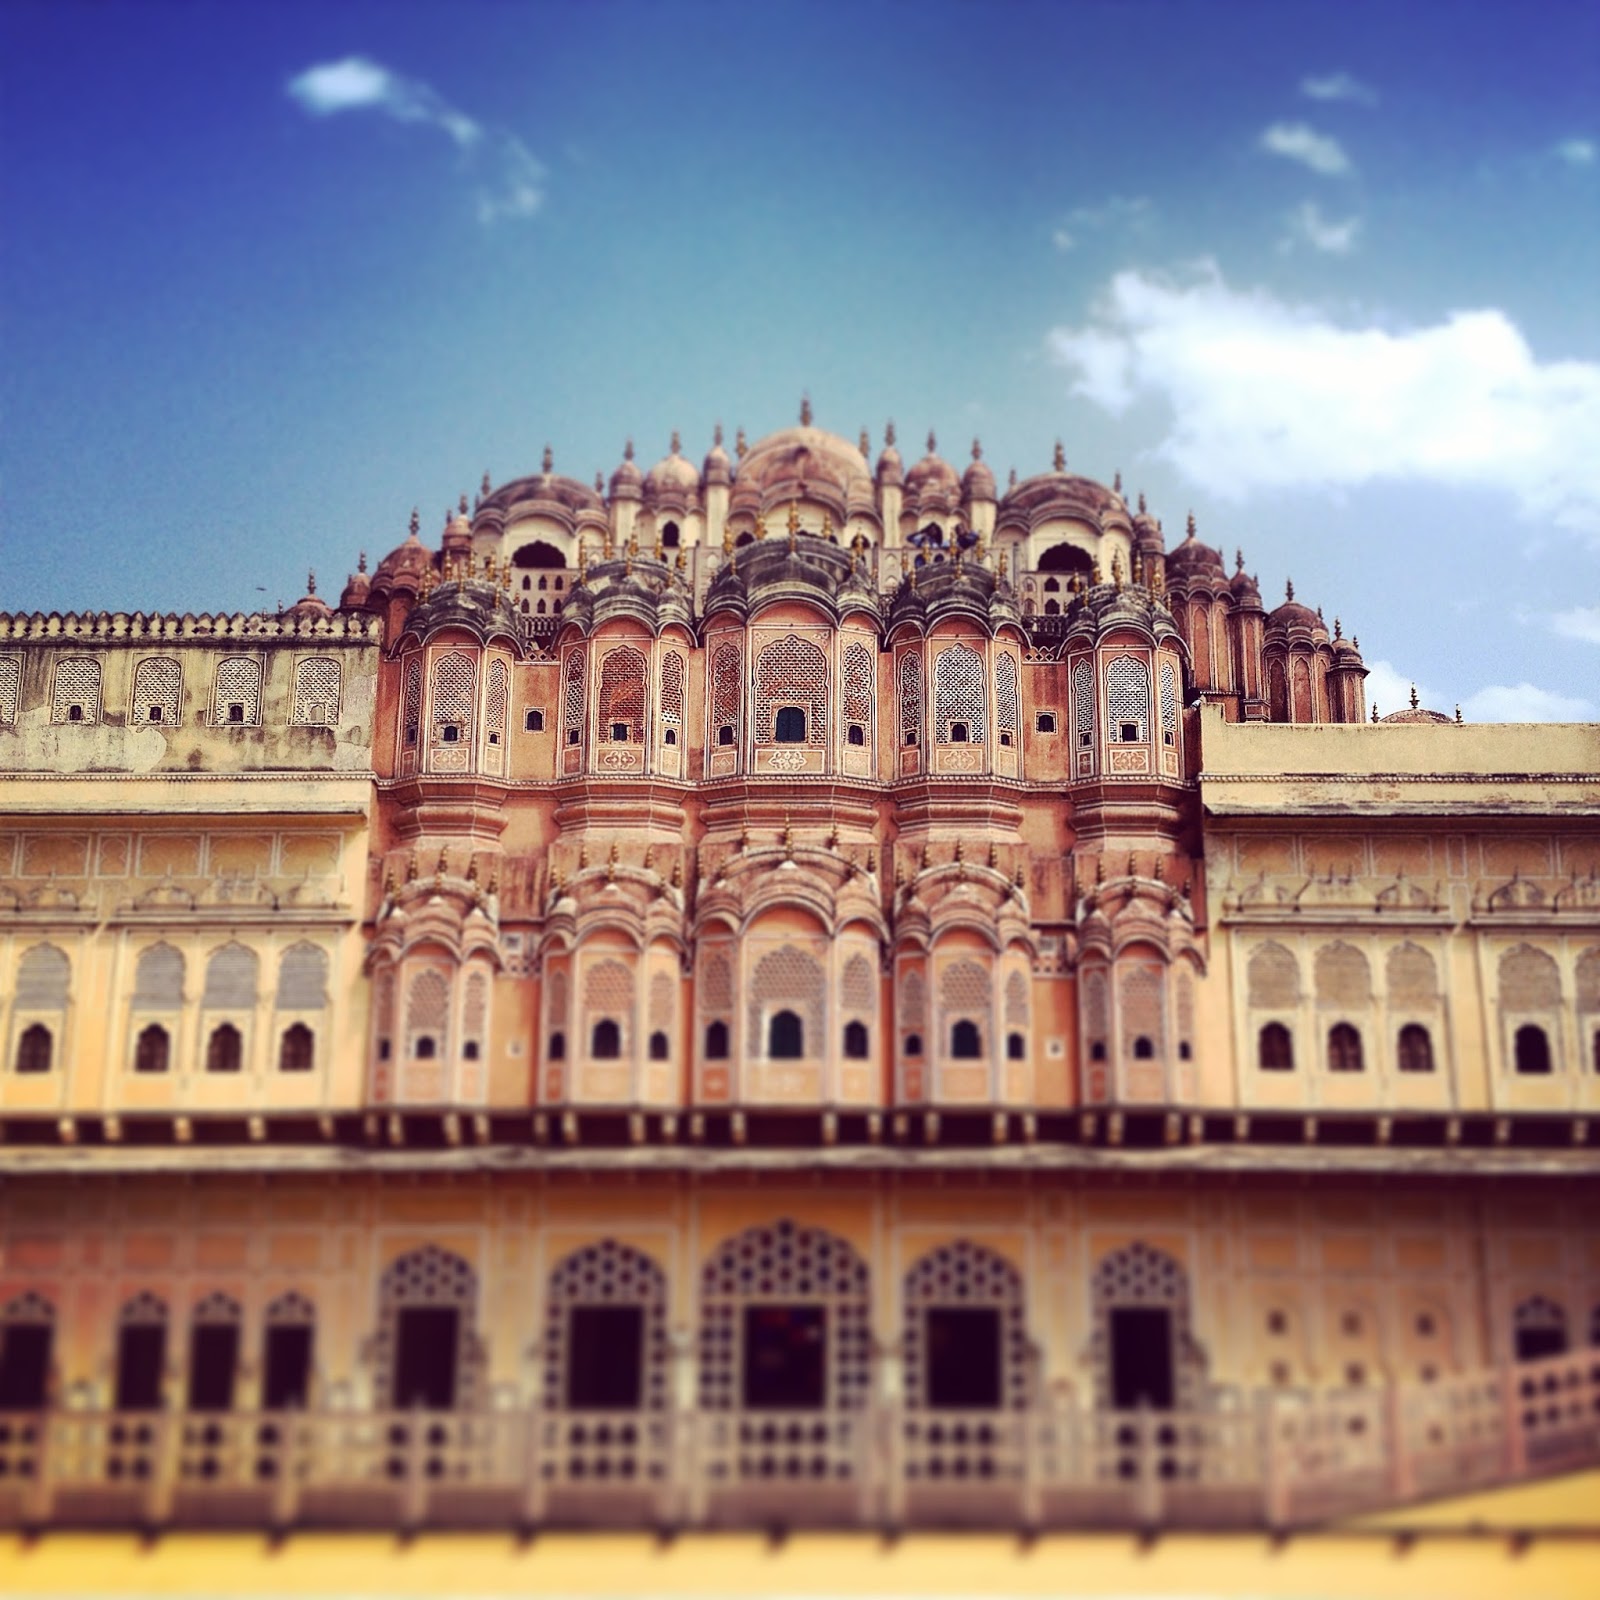 details and carvings of the hawa mahal building in jaipur